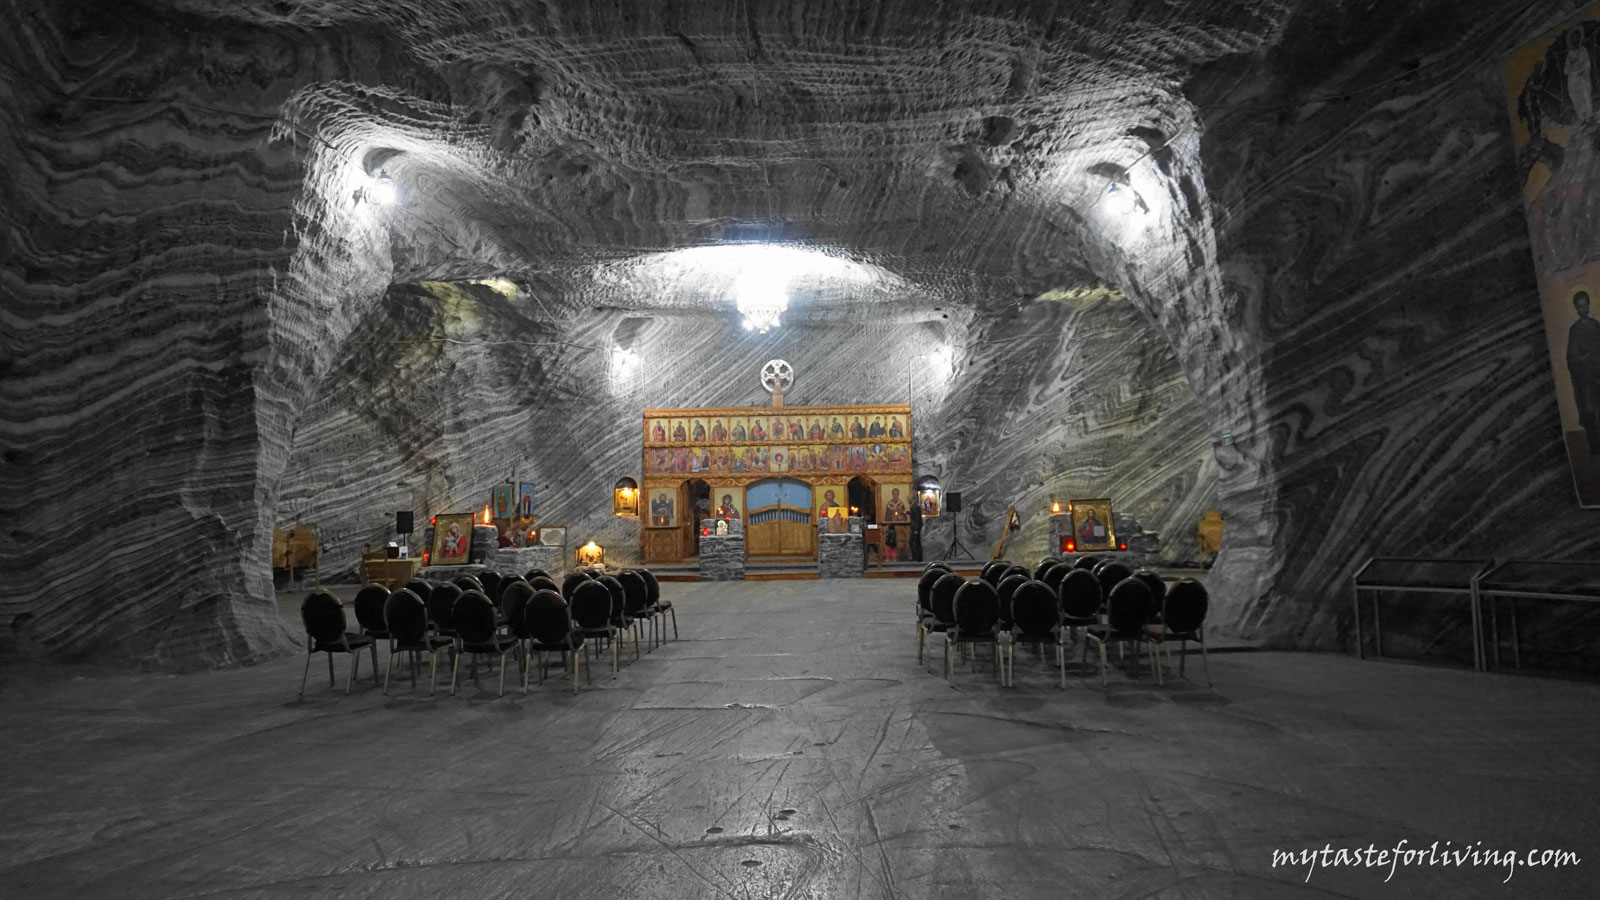 Ocnele Mari is a former salt mine, located in Romania, currently open to visitors and made as a gallery.